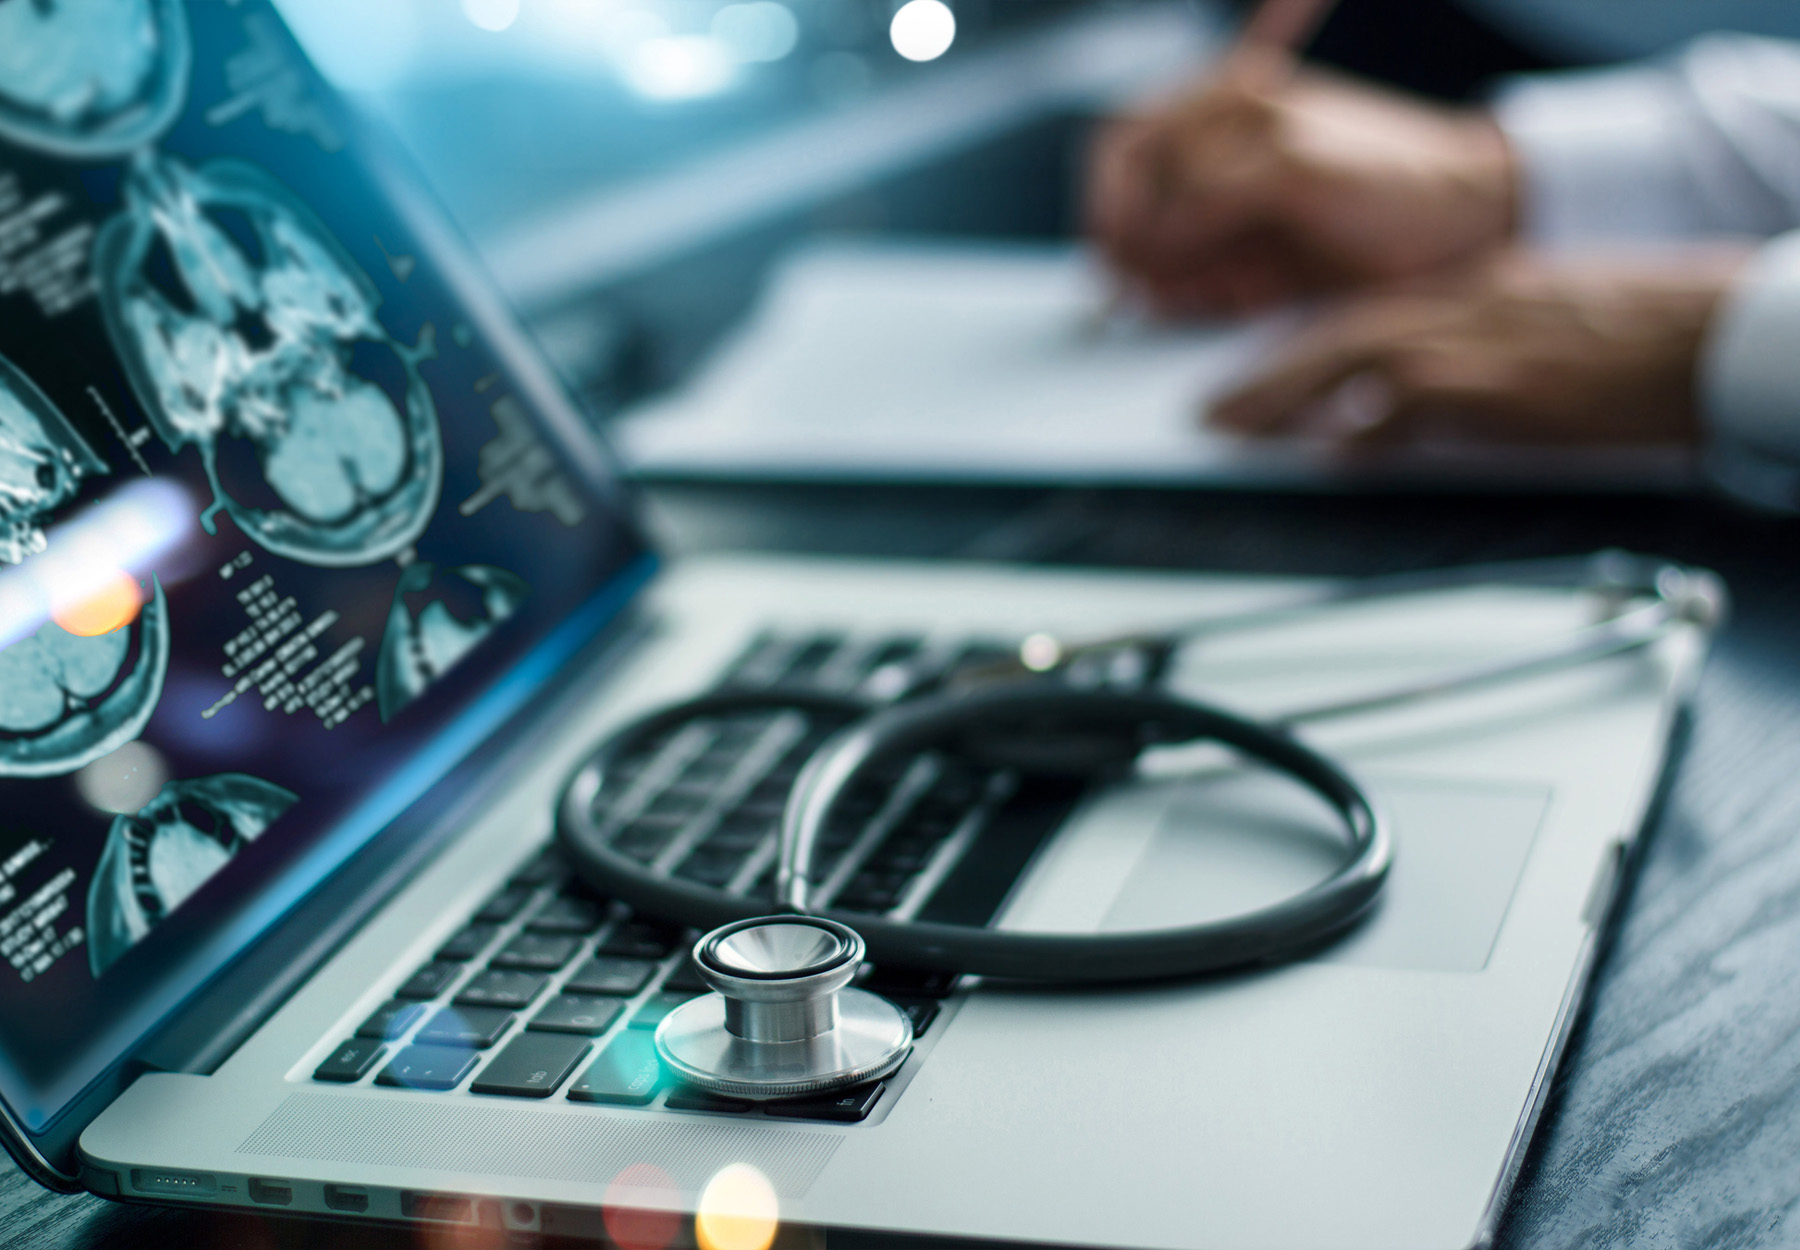 Closeup of doctor's computer monitor showing brain scans. Doctor's hands are writing notes in the background. Mental health diagnosis concept. Stock image.